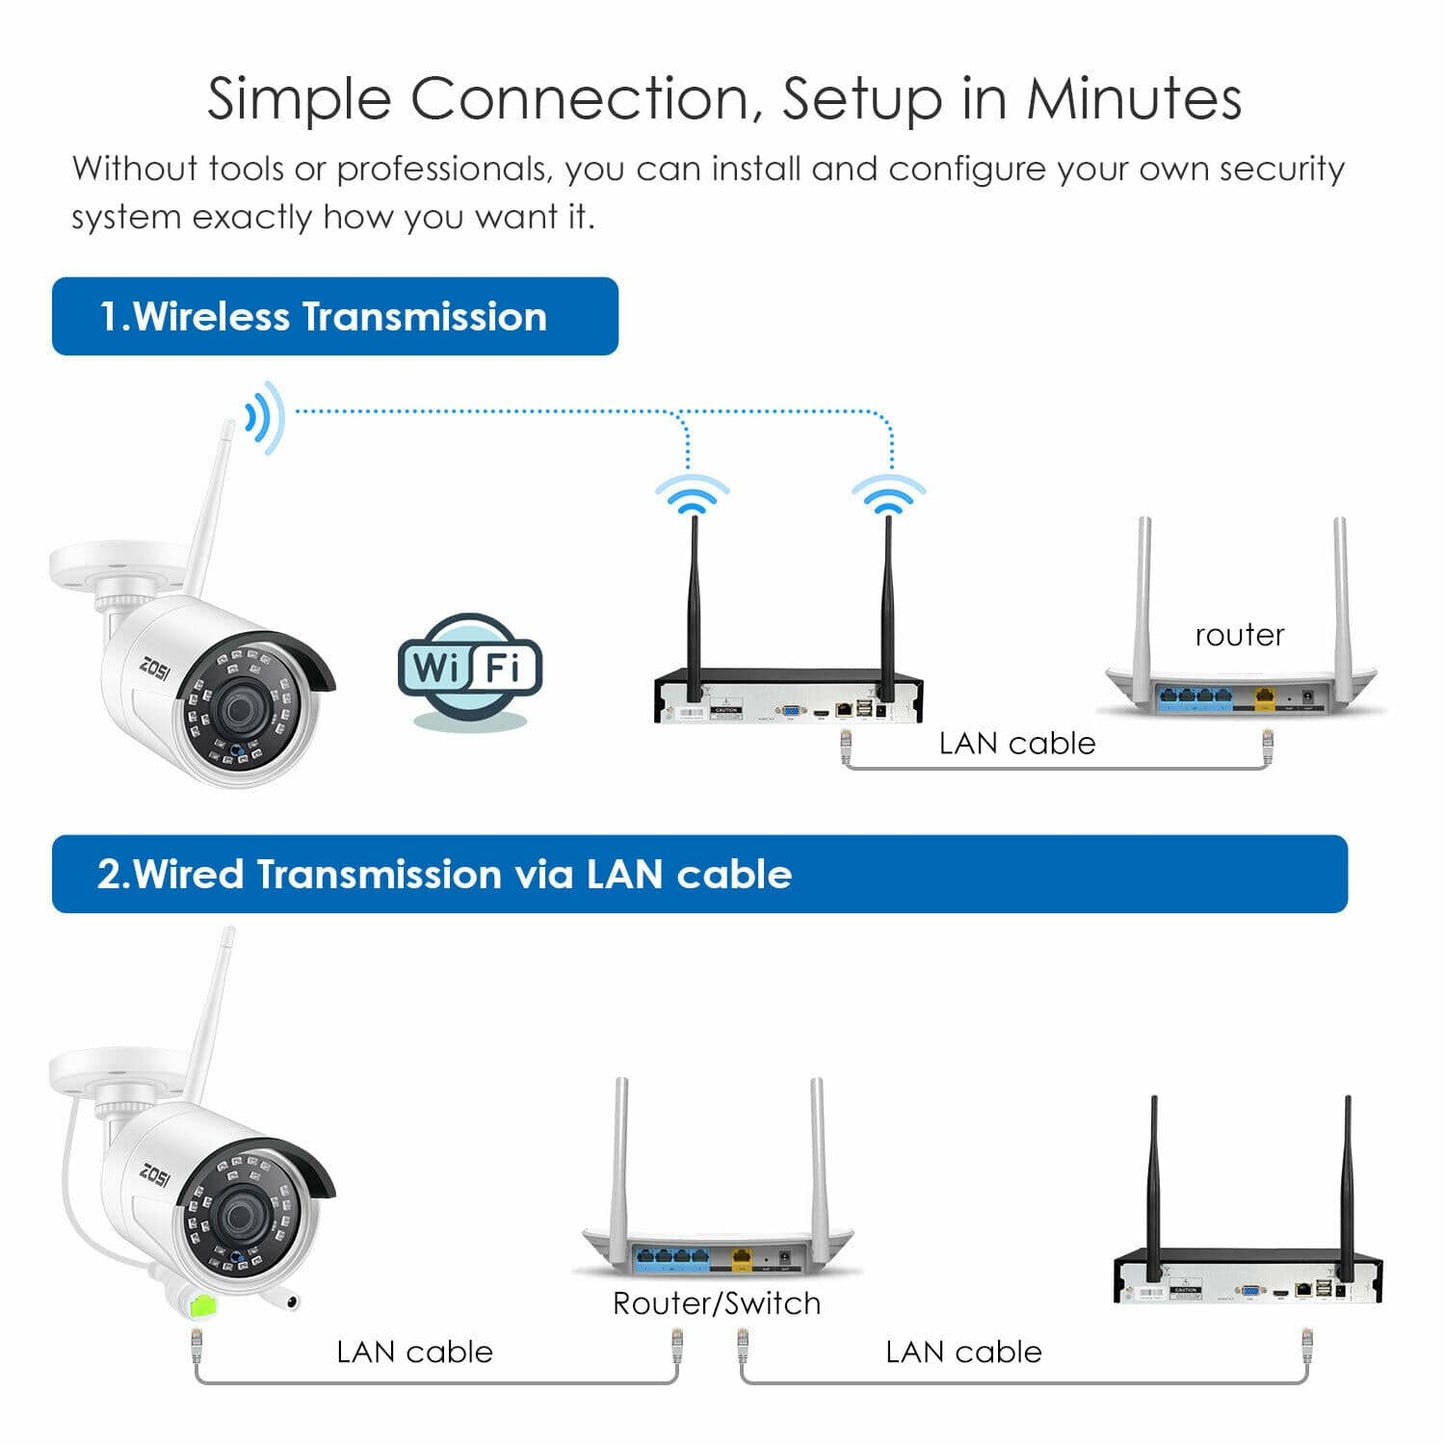 ZOSI - 8CH HD 1080p Wireless Security IP Camera System - 2MP WIFI NVR Kit Outdoor - 8CH HD 1080p CCTV